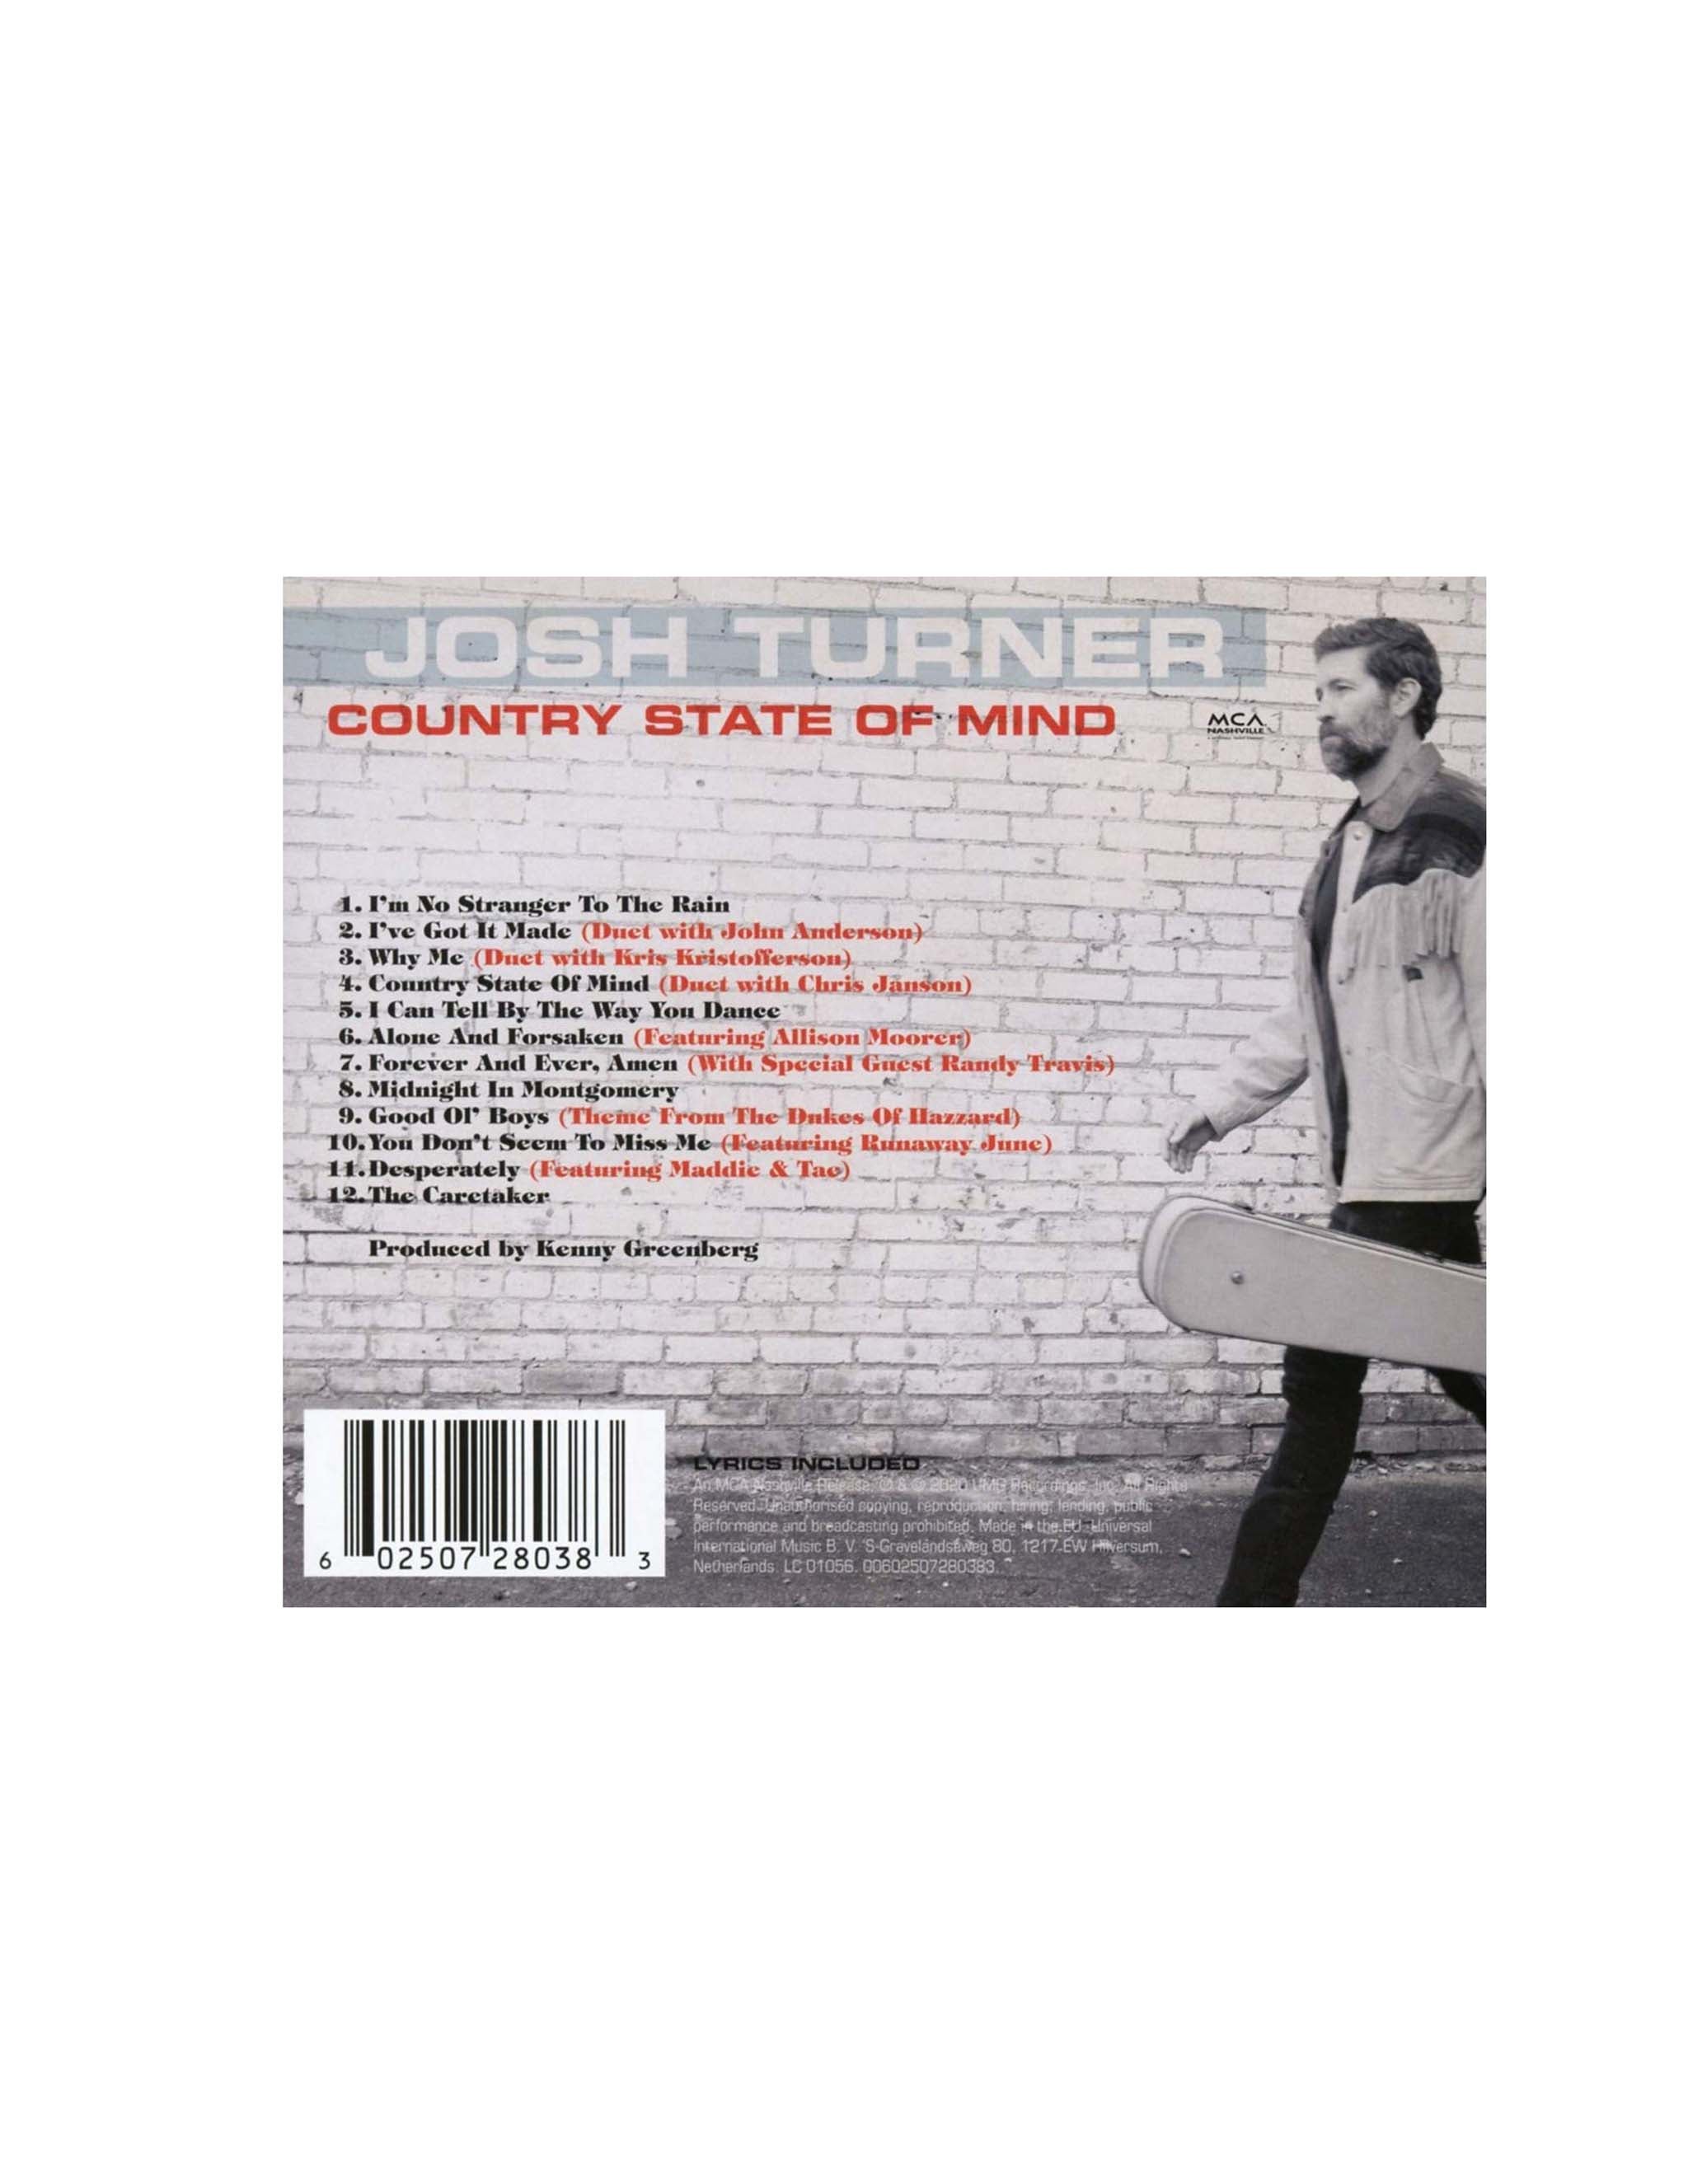 Josh Turner: Country State of Mind (CD)